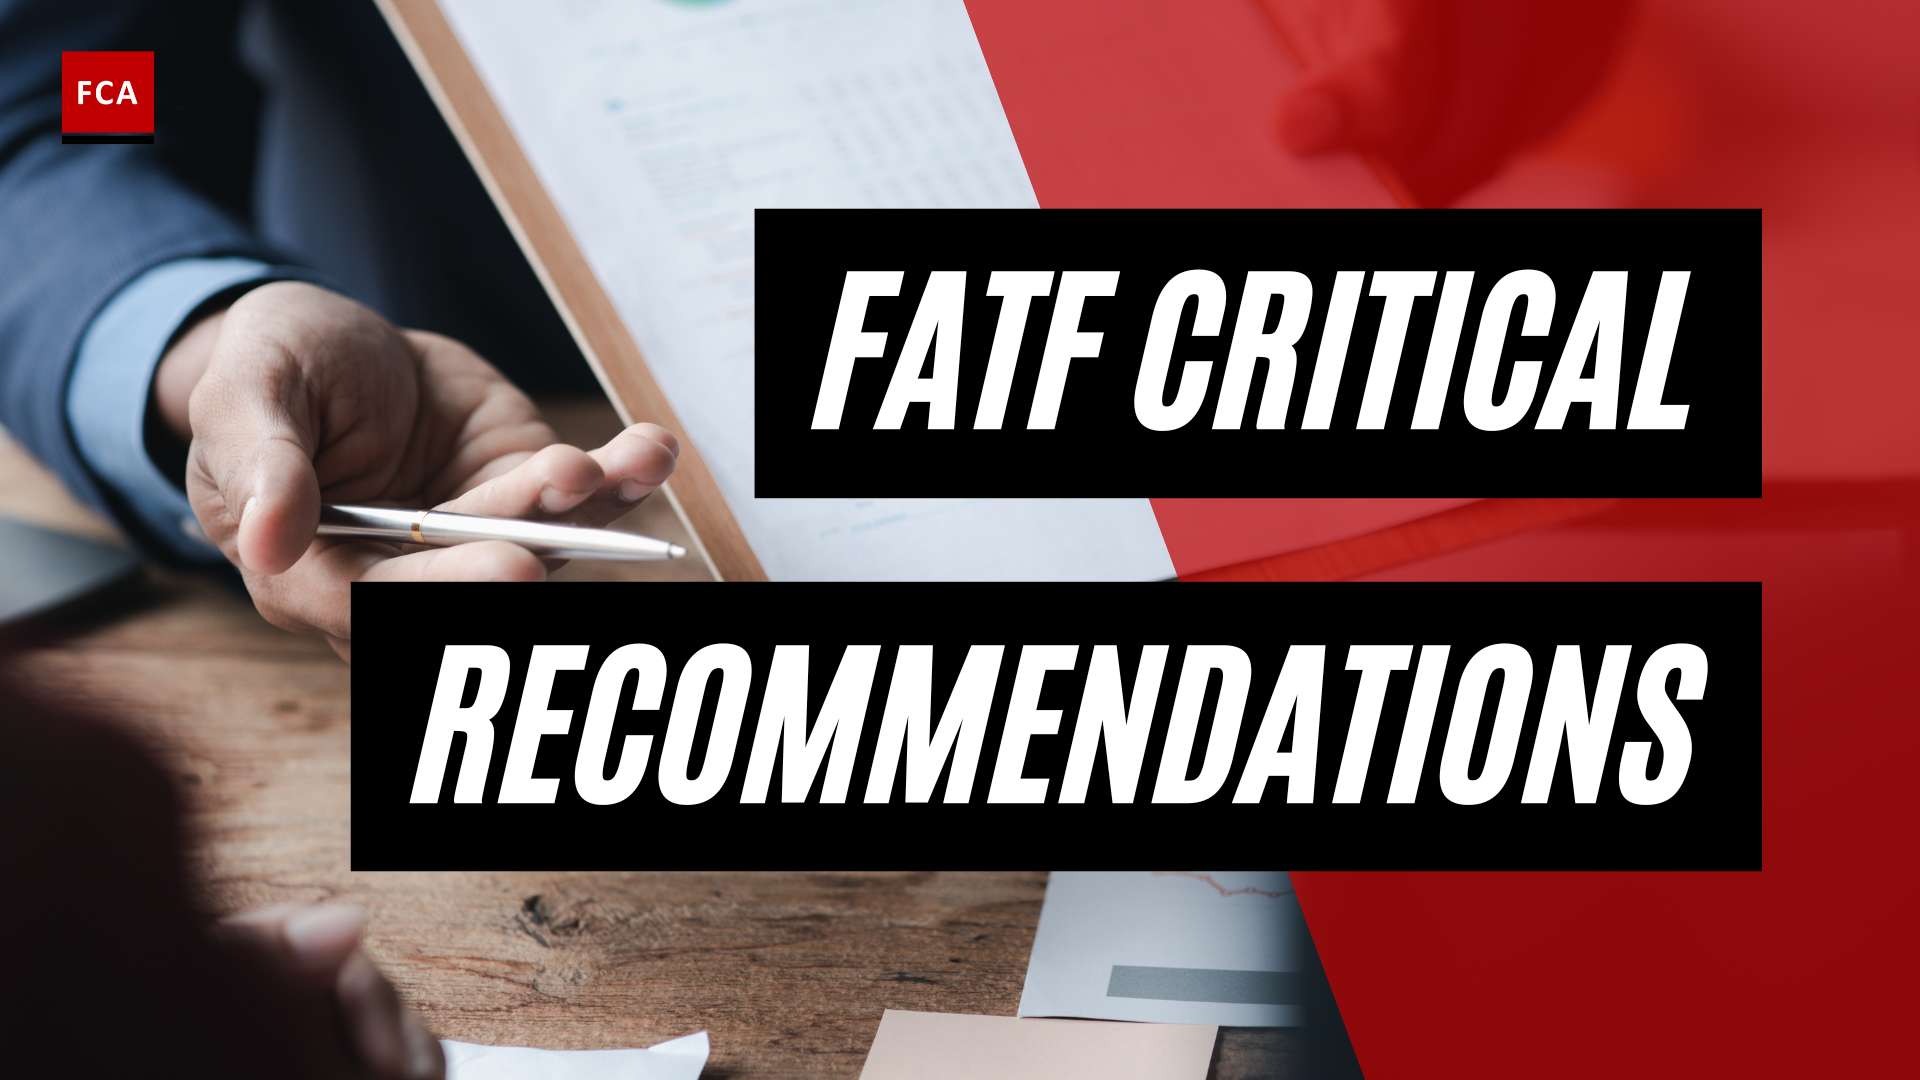 Shedding Light On Beneficial Ownership: Fatfs Critical Recommendations